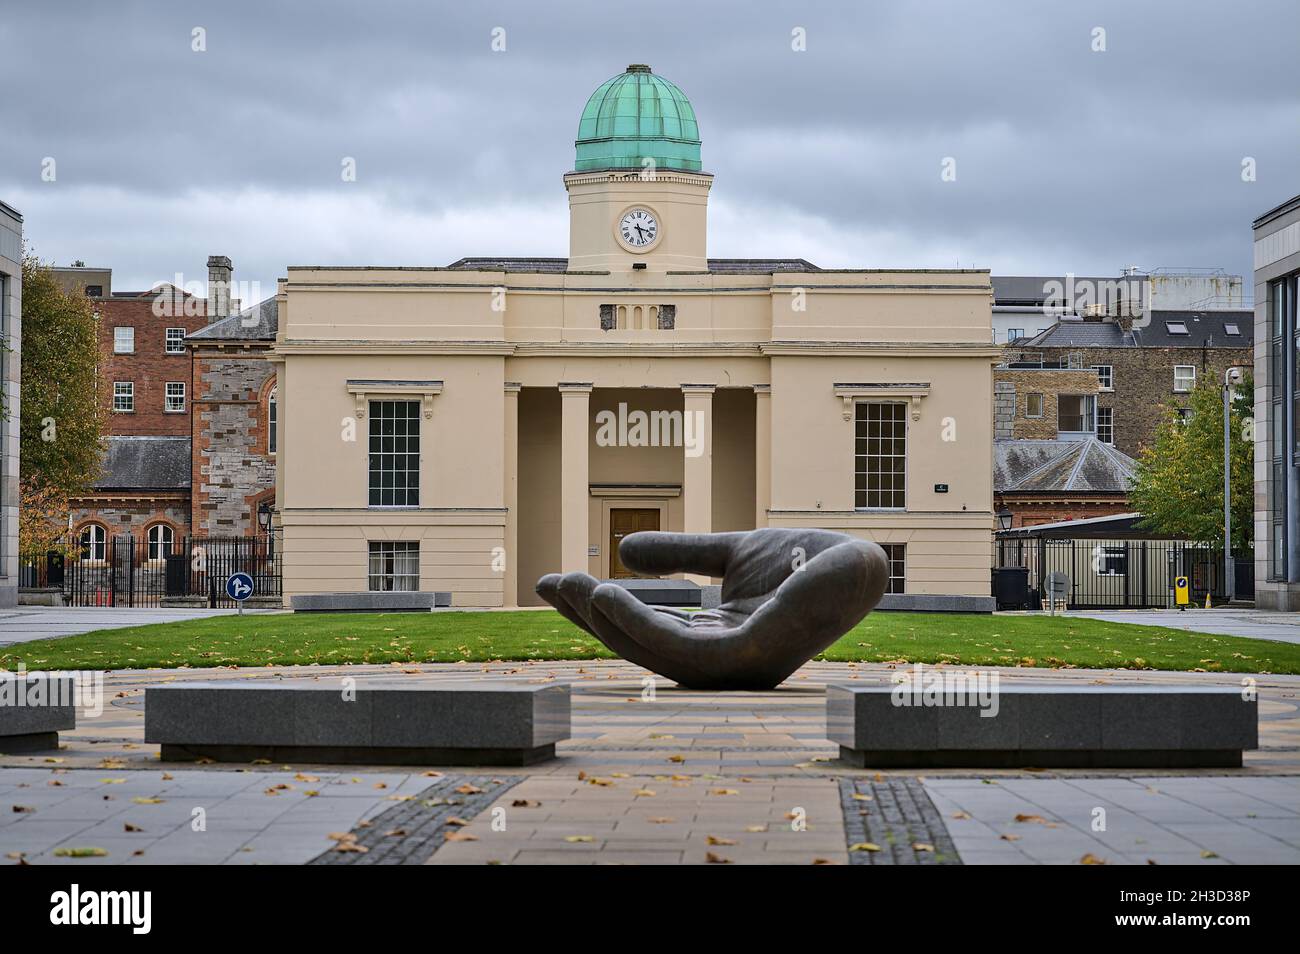 Dublin, Ireland - October 23, 2021: Autumn view of The Clock Tower building and The Wishing Hand sculpture at courtyard of Department of Education Stock Photo